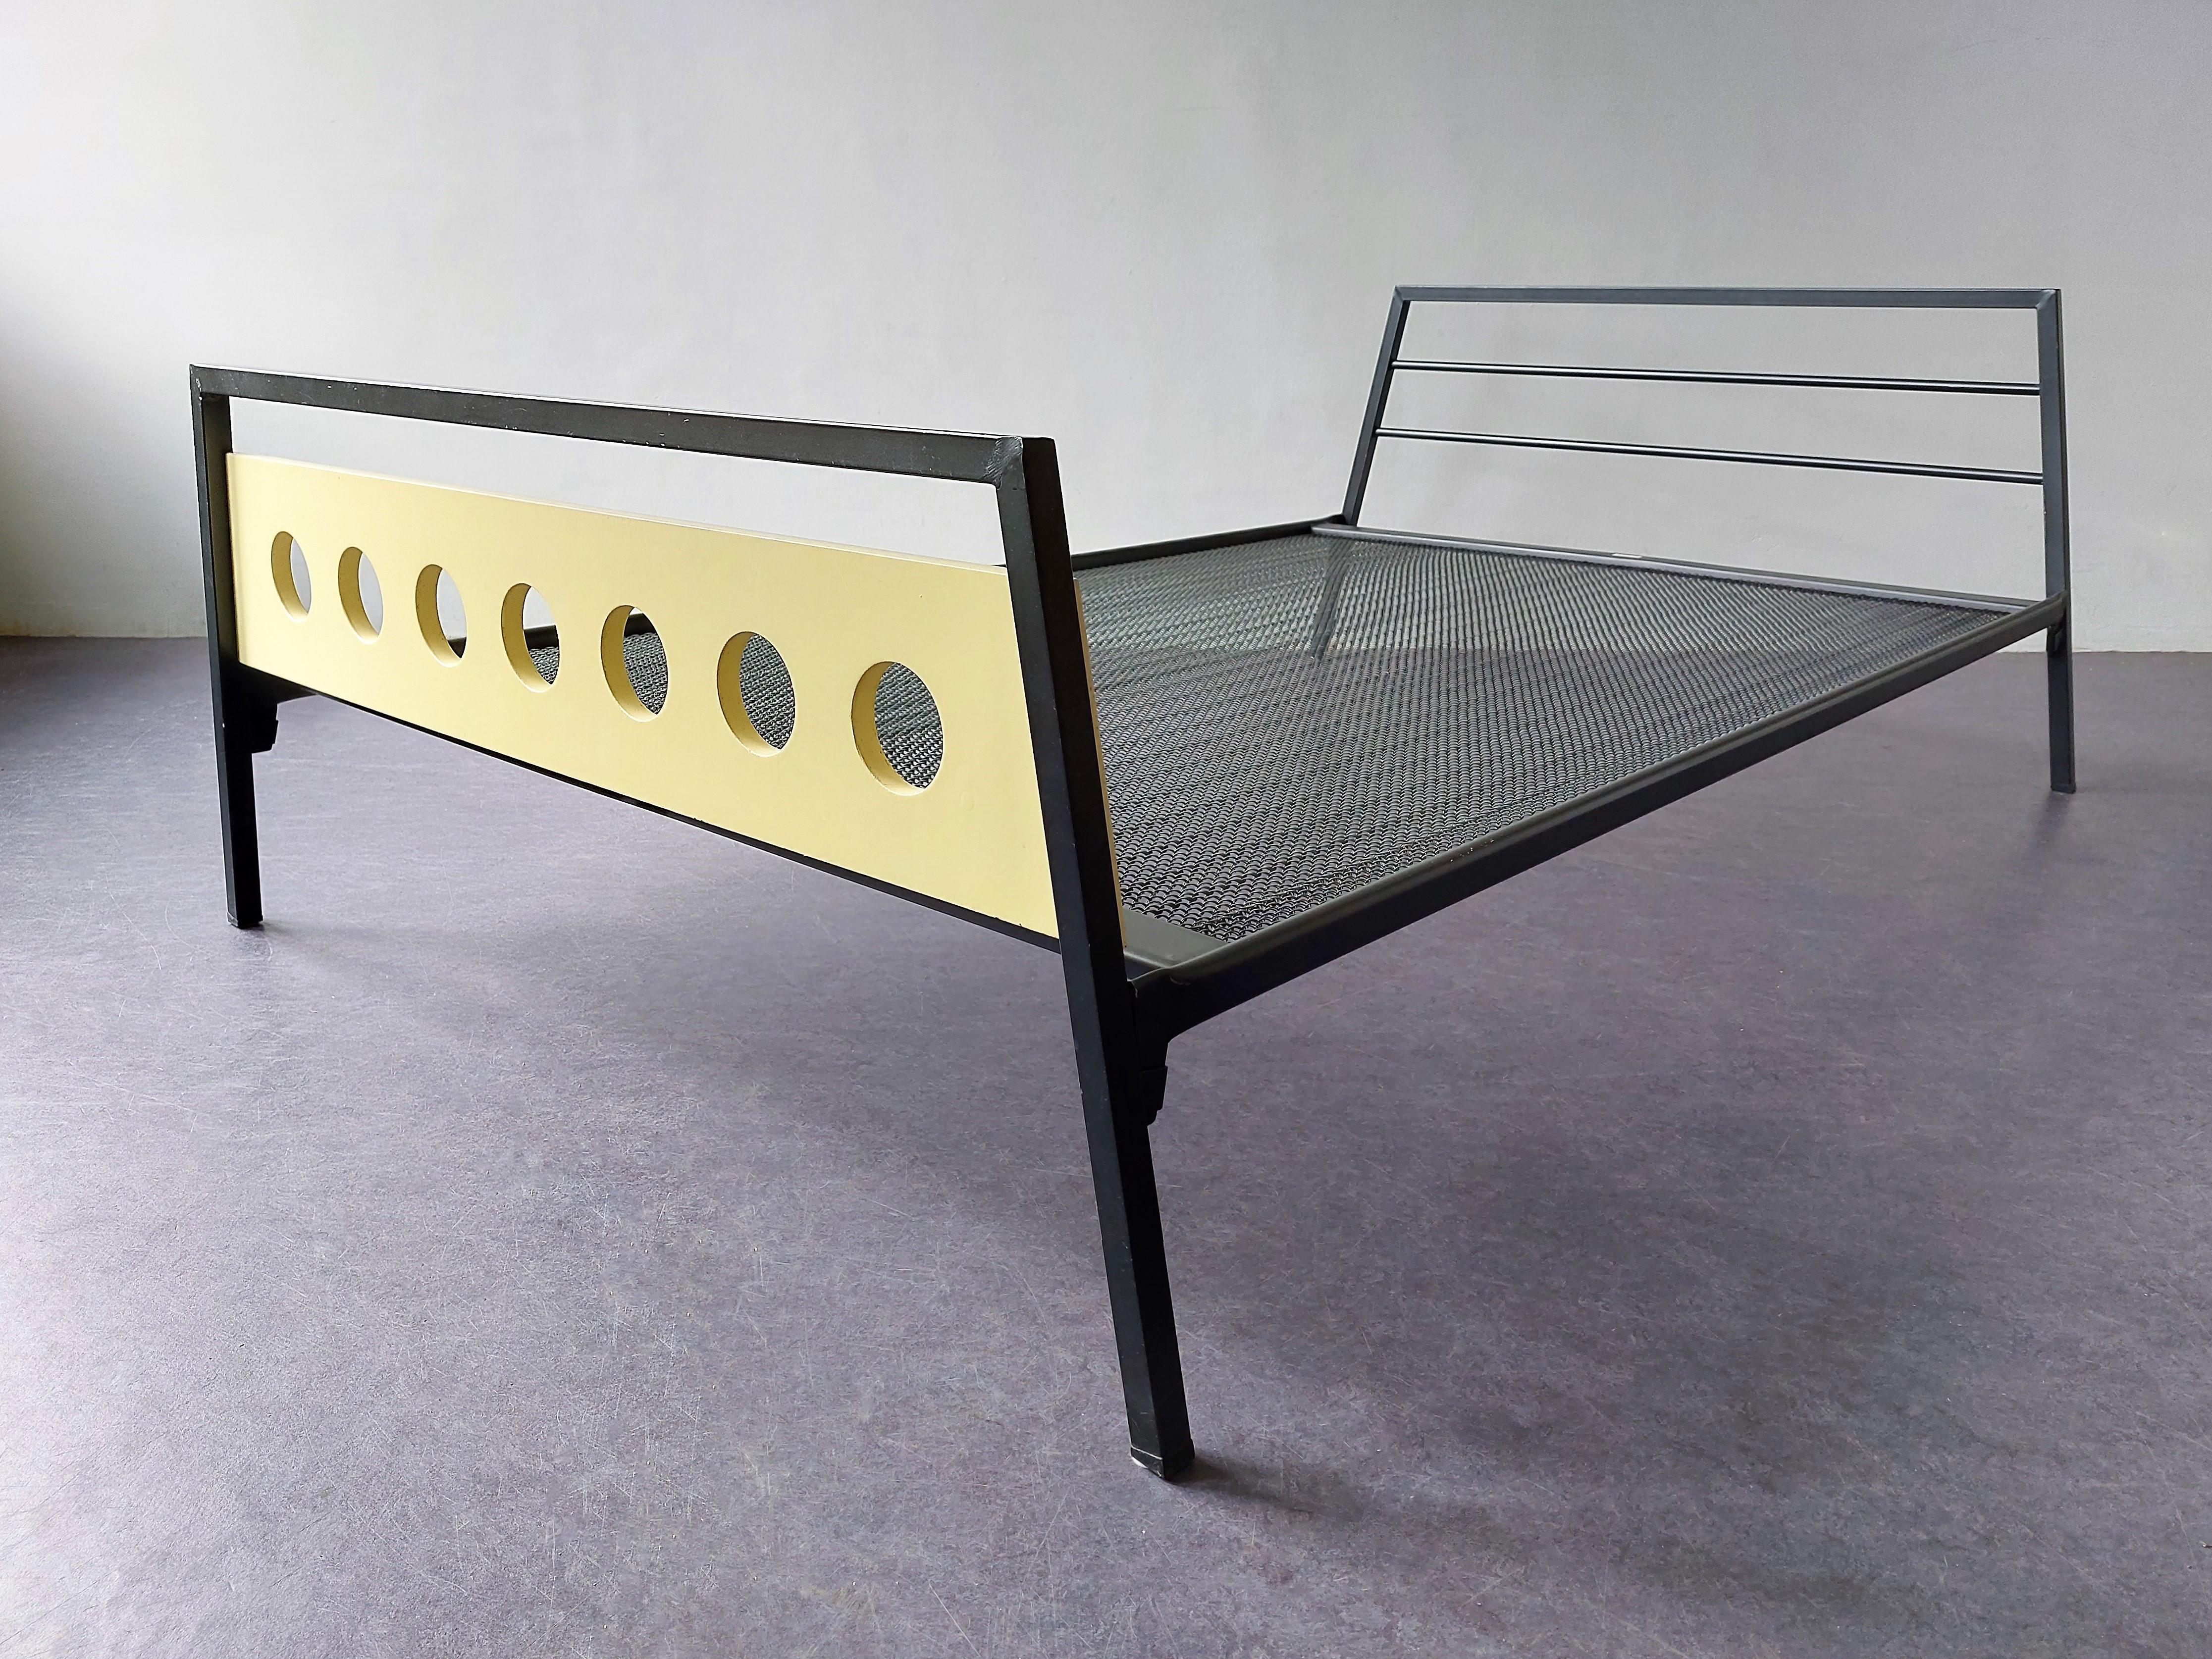 This stunning bed is designed by Rob Parry and Emile Truijen and is made by the former and renowned Dutch bed manufacturer DICO in the 1950's. It is part of the 'Kamer 56' (translated: Room '56) serie. The bed spring is held by 2 black lacquered